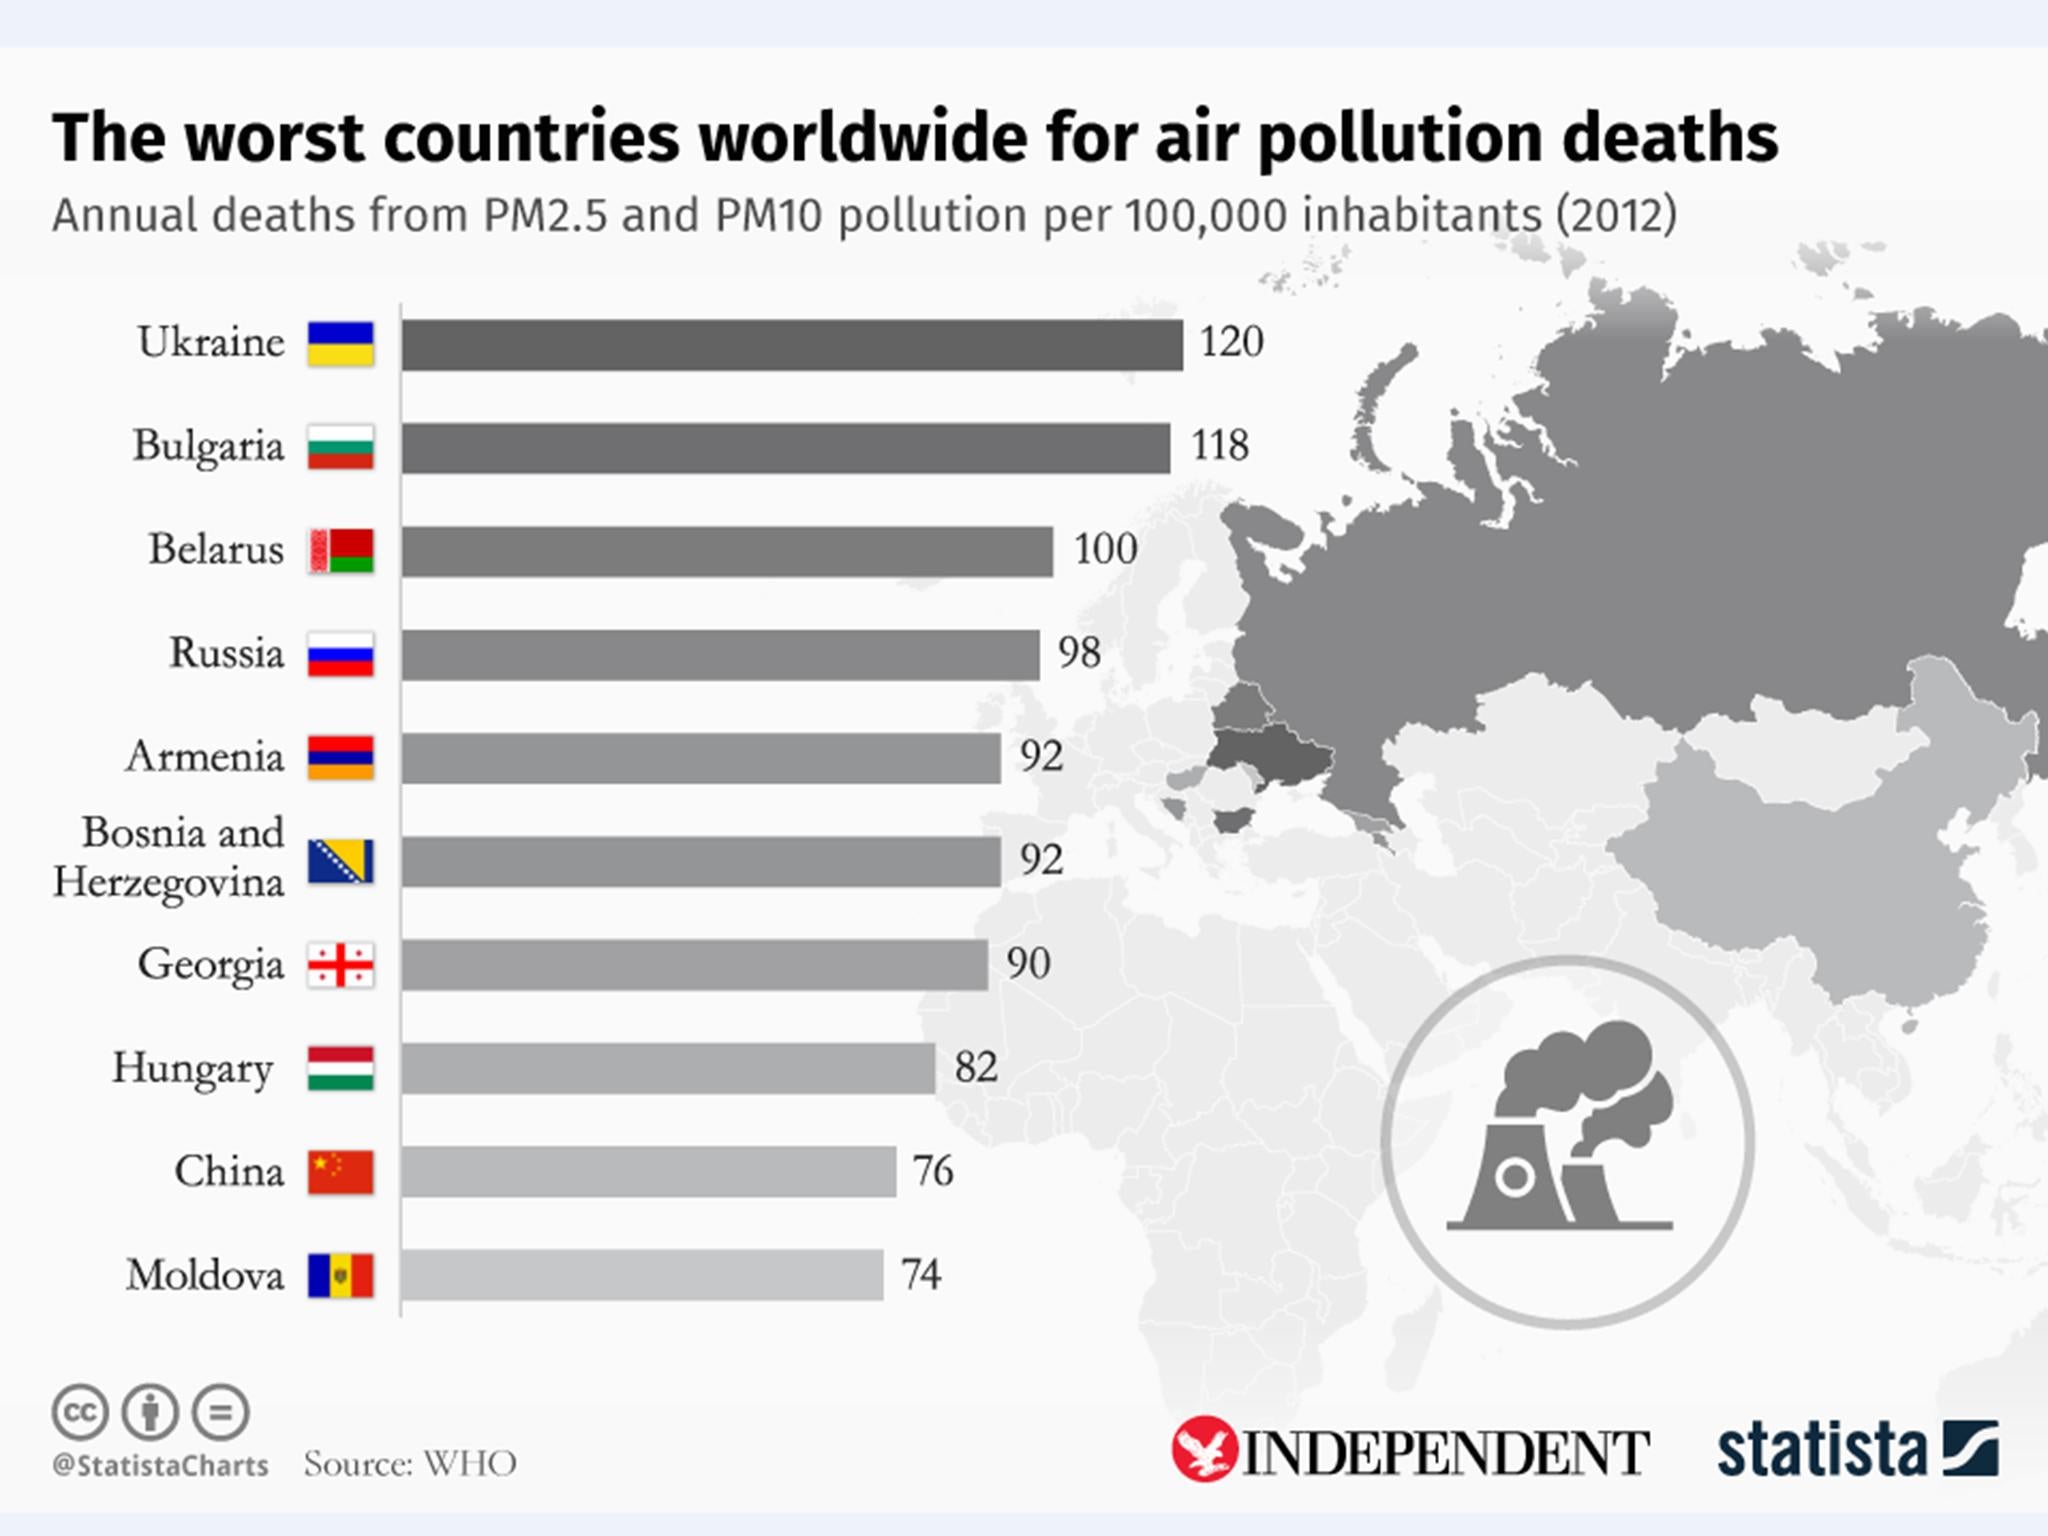 The worst countries in the world for air pollution deaths